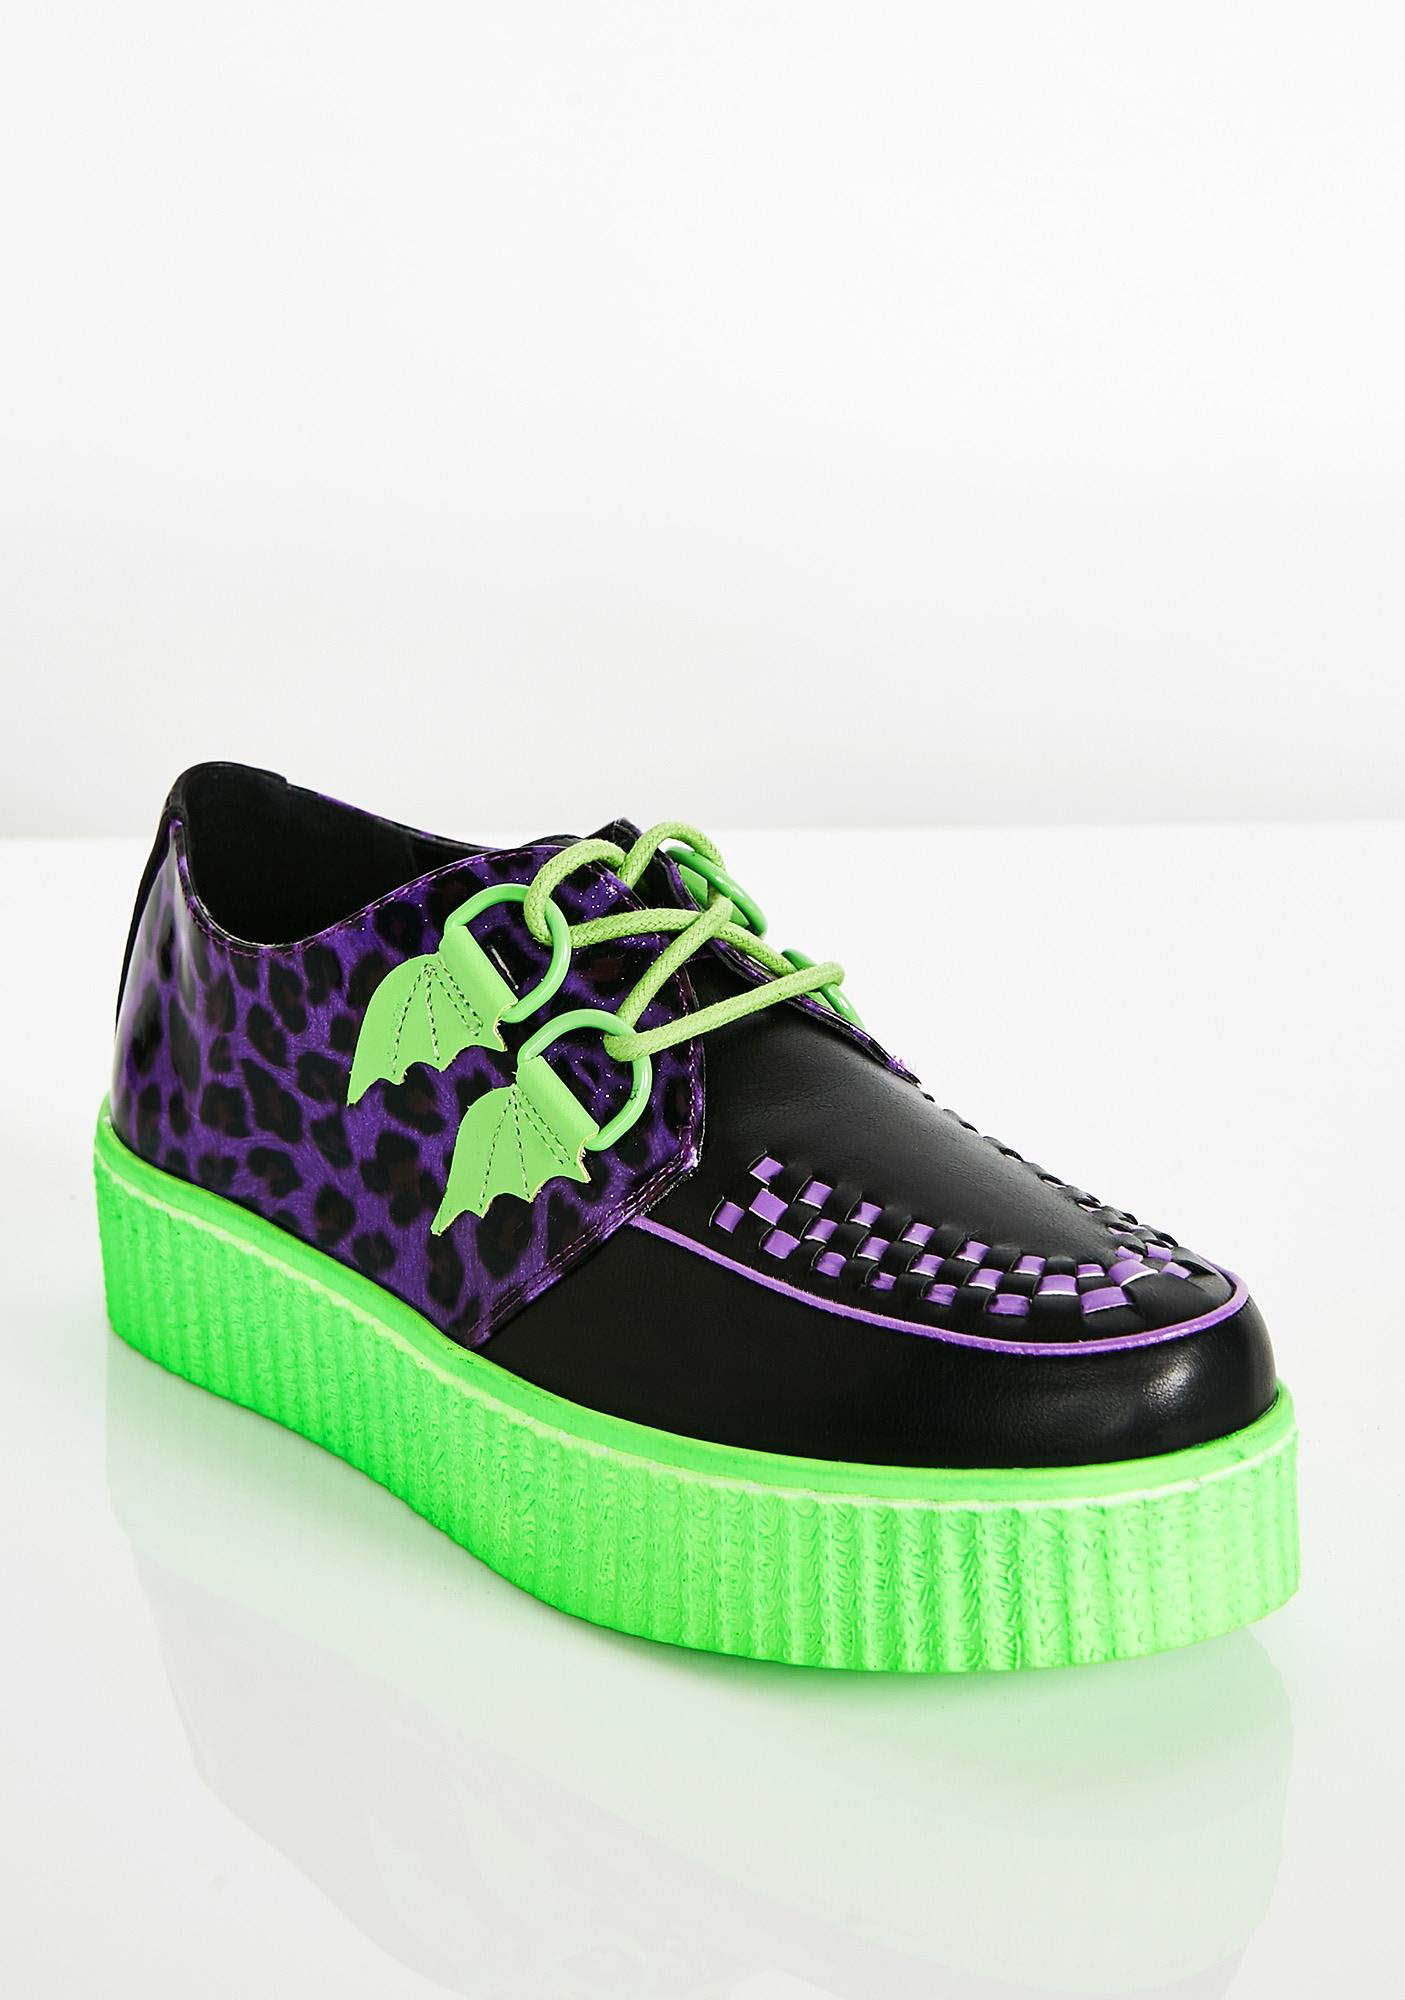 Krypt Slime Limited Edition Creepers by Strange Cvlt - SALE sz 7 only